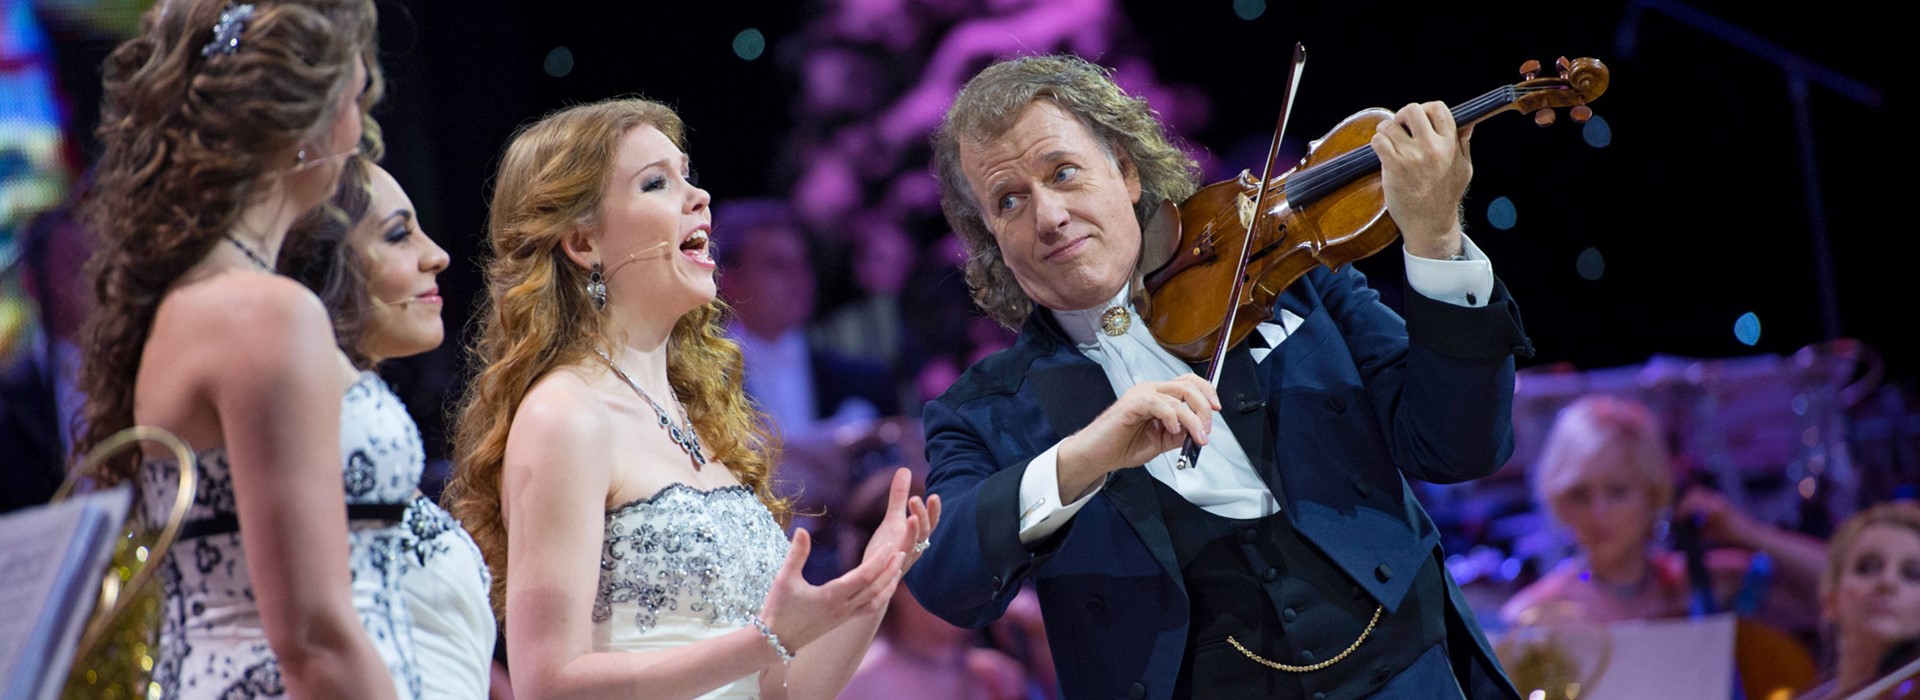 tourhub | Newmarket Holidays | Andre Rieu, 4 days in Liverpool | 98736